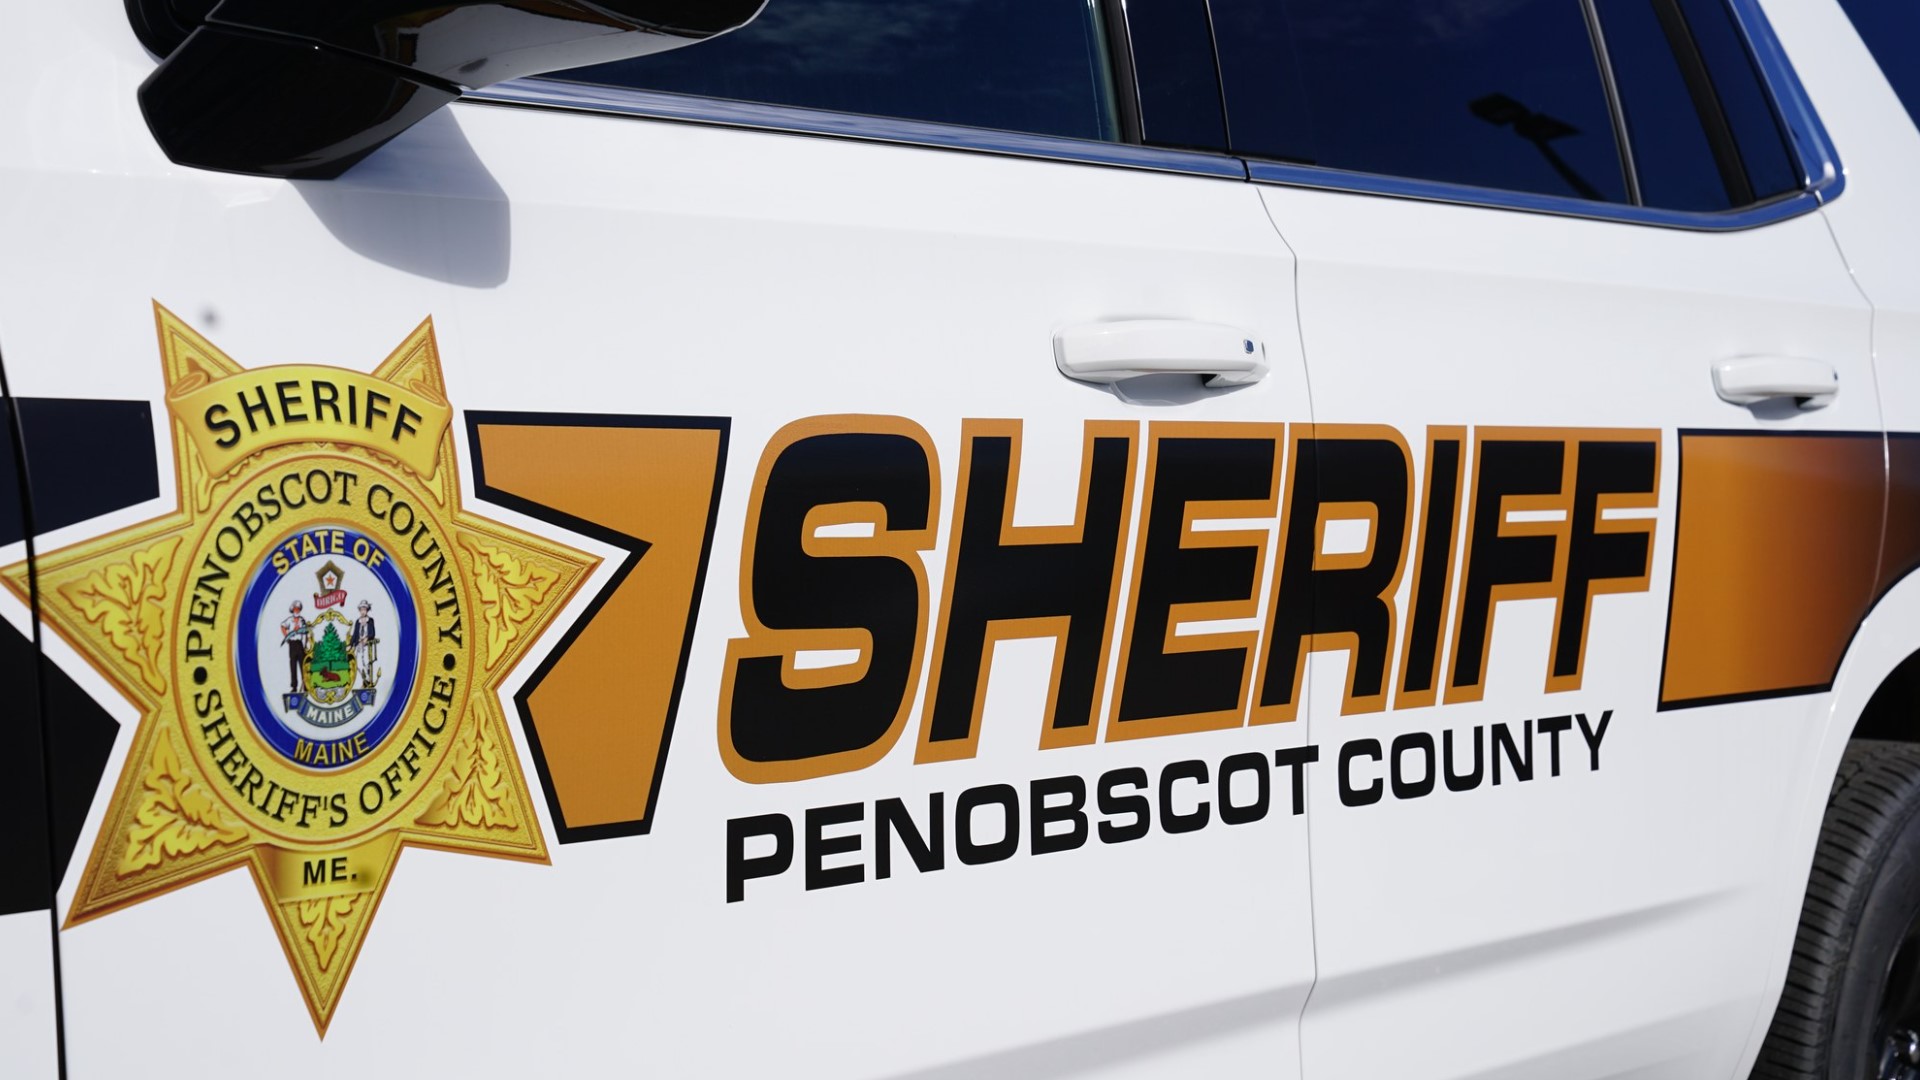 The Penobscot County Sheriff's Office said deputies arrested Devon Holmes, who awaits extradition to New York.